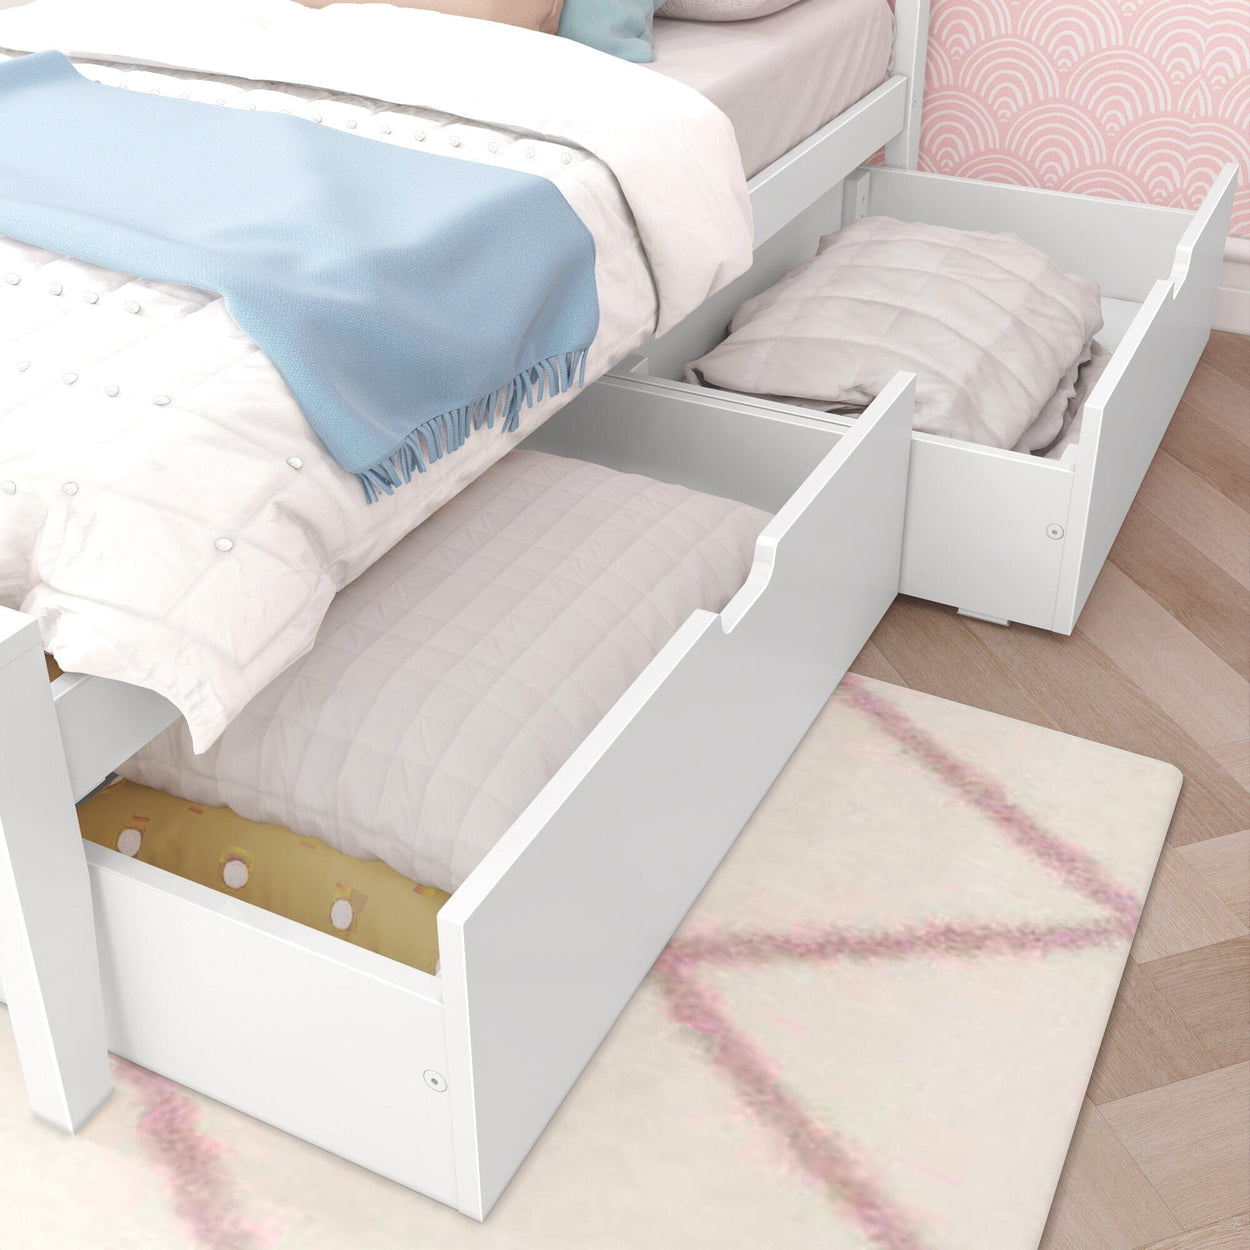 187100-002 : Kids Beds Classic Twin-Size Bed with Panel Headboard and Storage Drawers, White